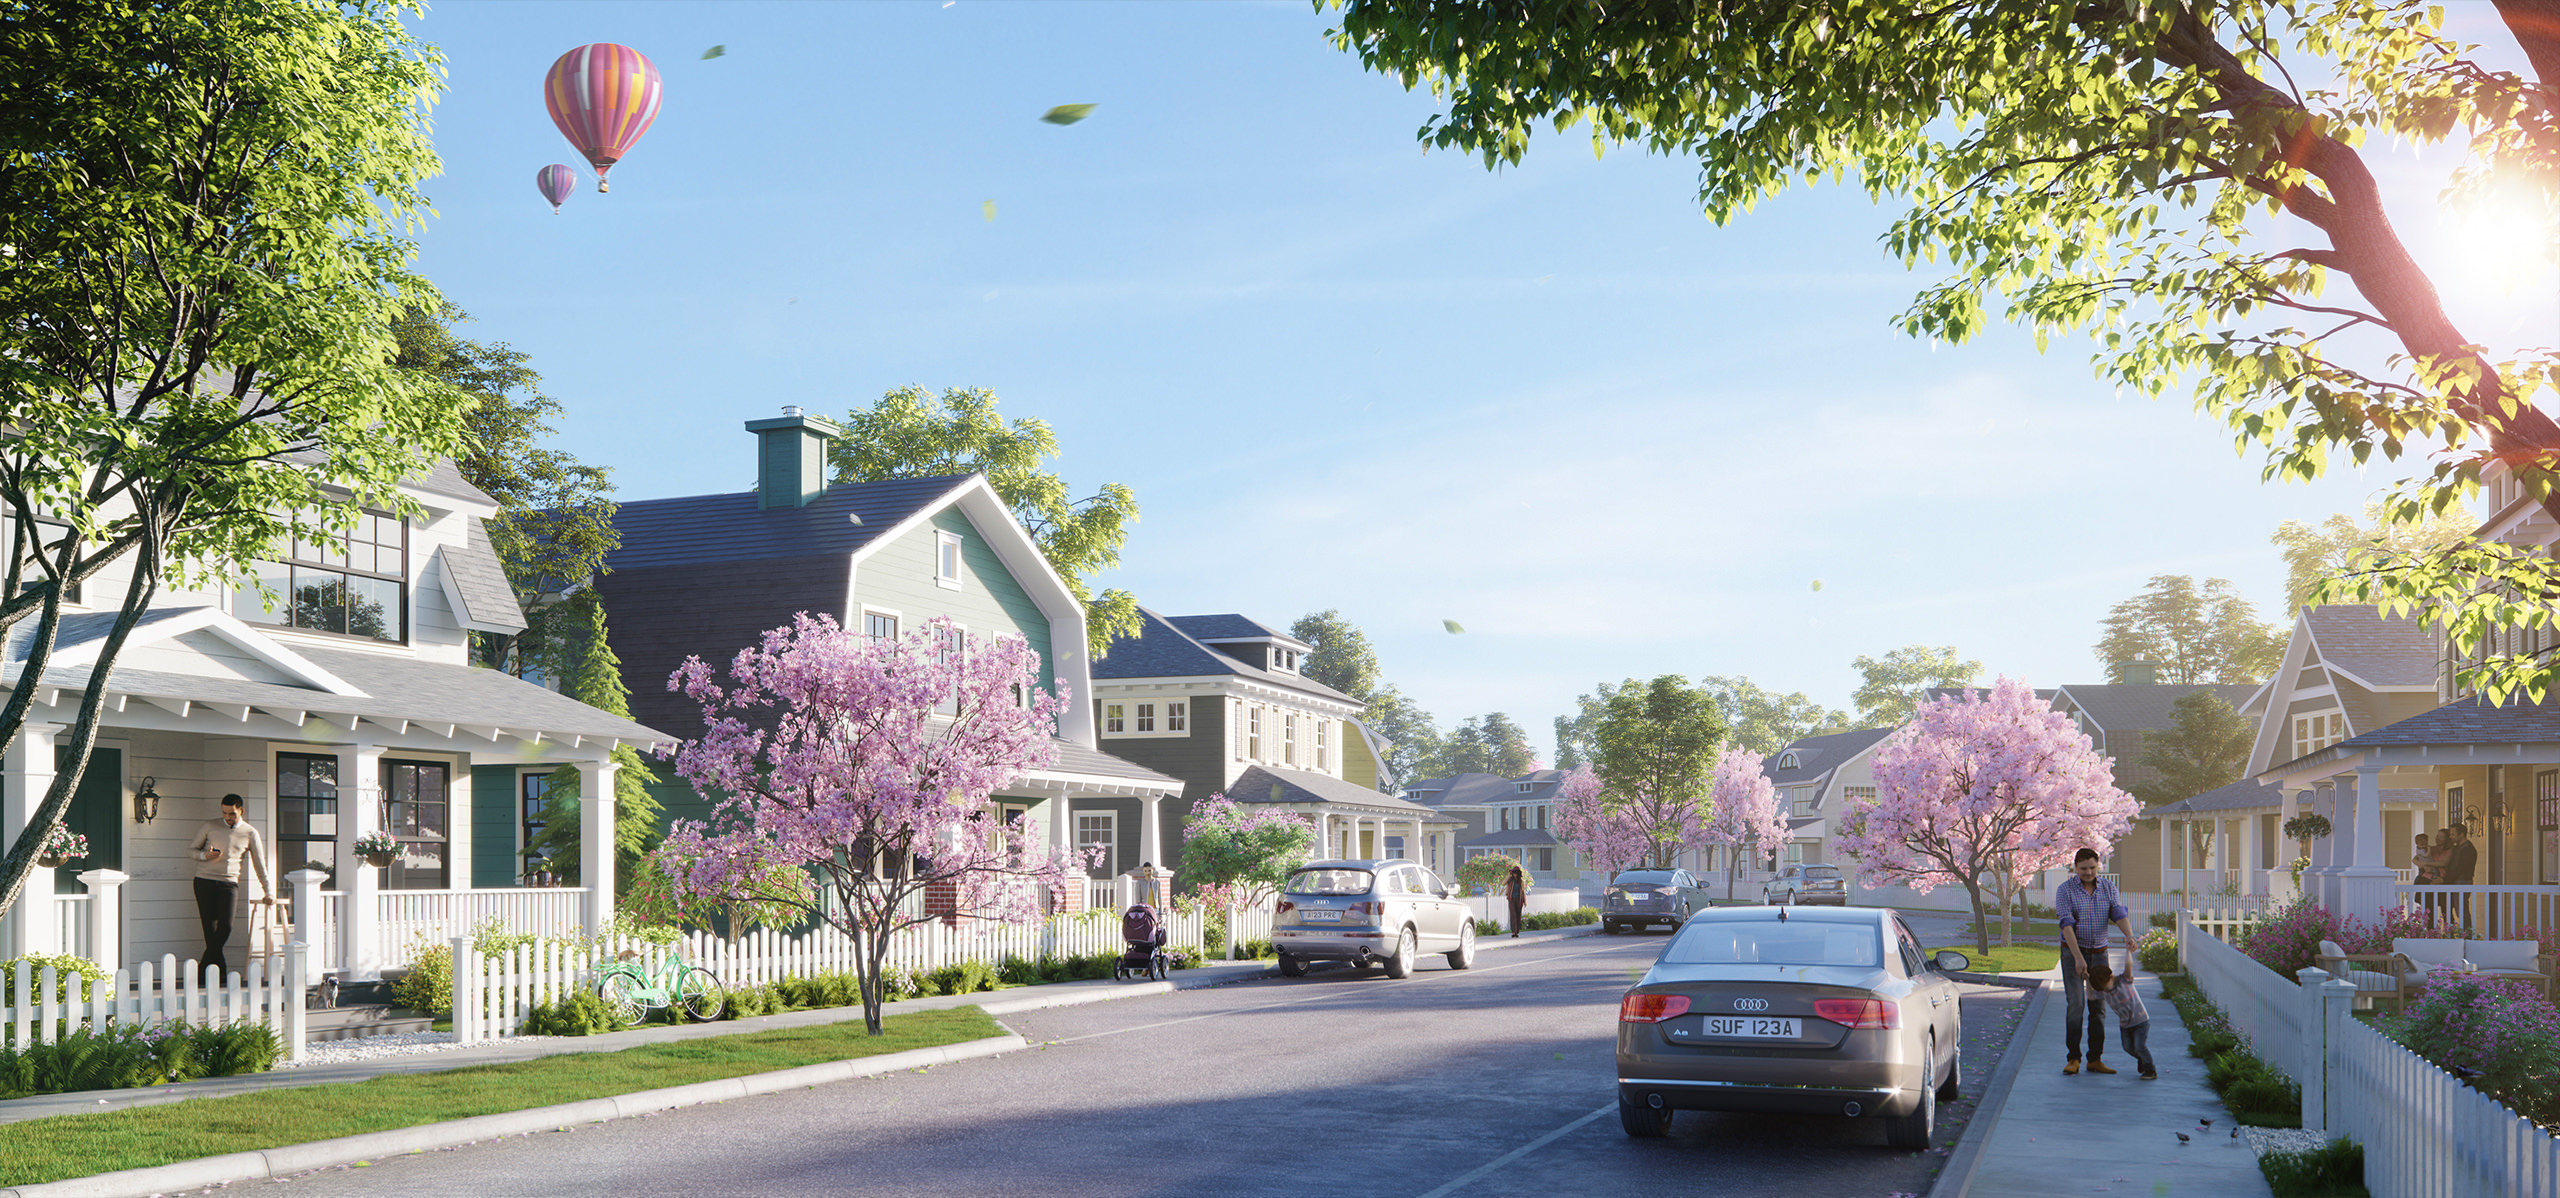 Exterior 3D rendering of a family-oriented neighborhood in Chelsea, Canada visualized from a human eye perspective showing rows of cottages along the driveway with blossoming trees